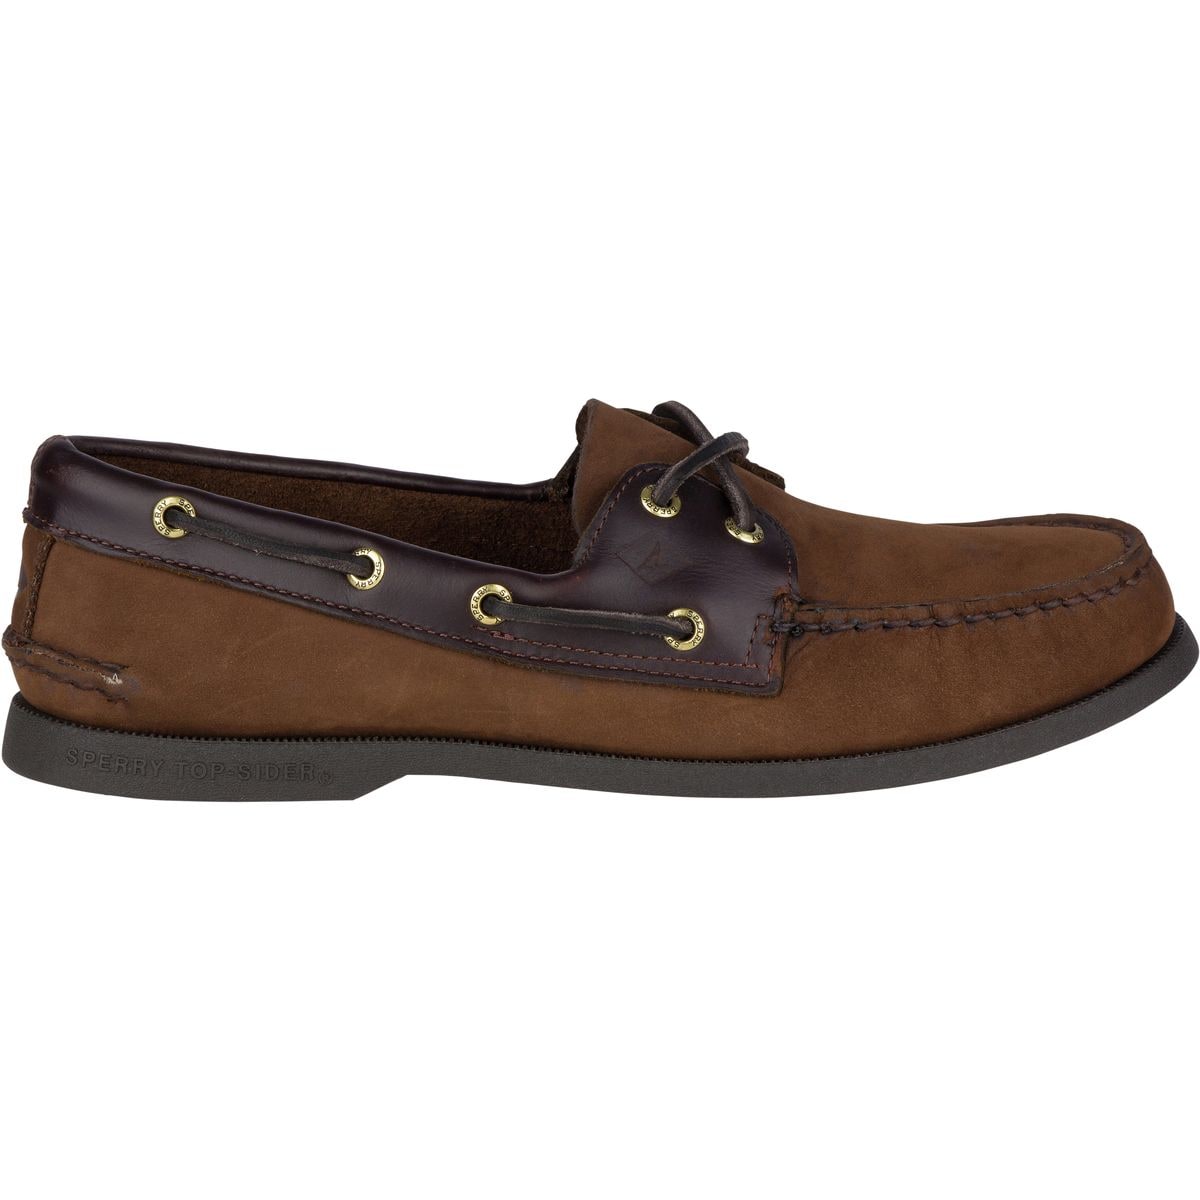 Sperry Top-Sider Authentic Original 2-Eye Loafer - Men's product image